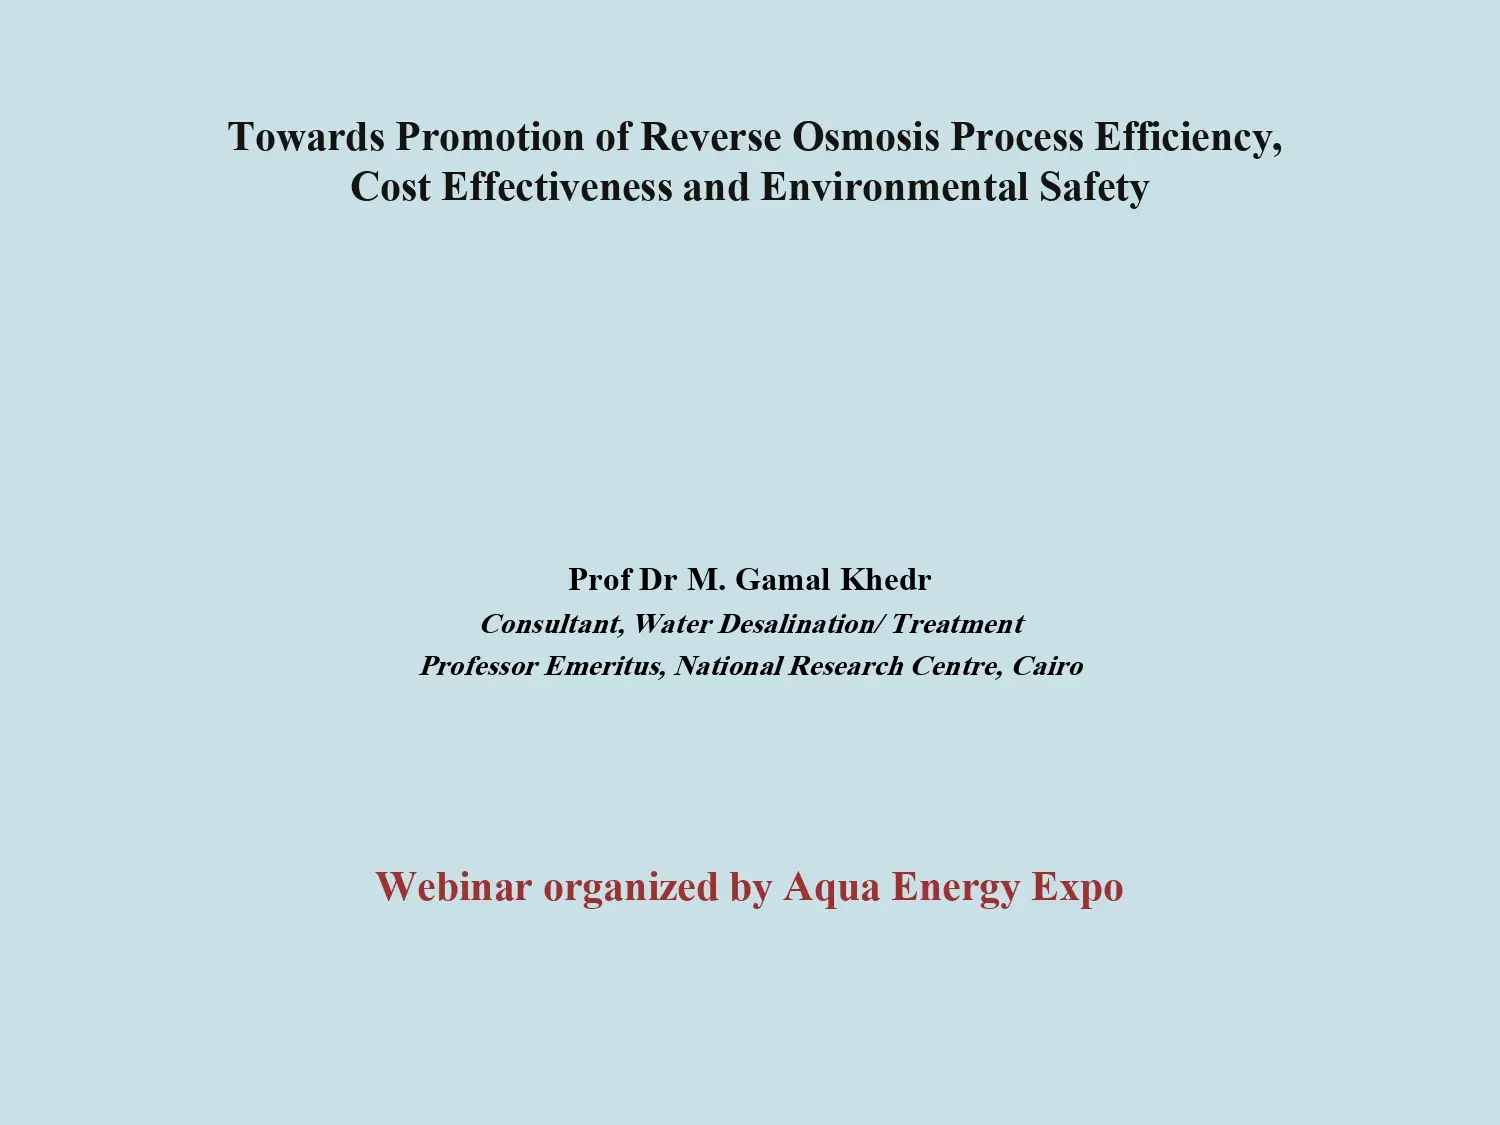 Towards Promotion of Reverse Osmosis Process Efficiency, Cost Effectiveness and Environmental Safety